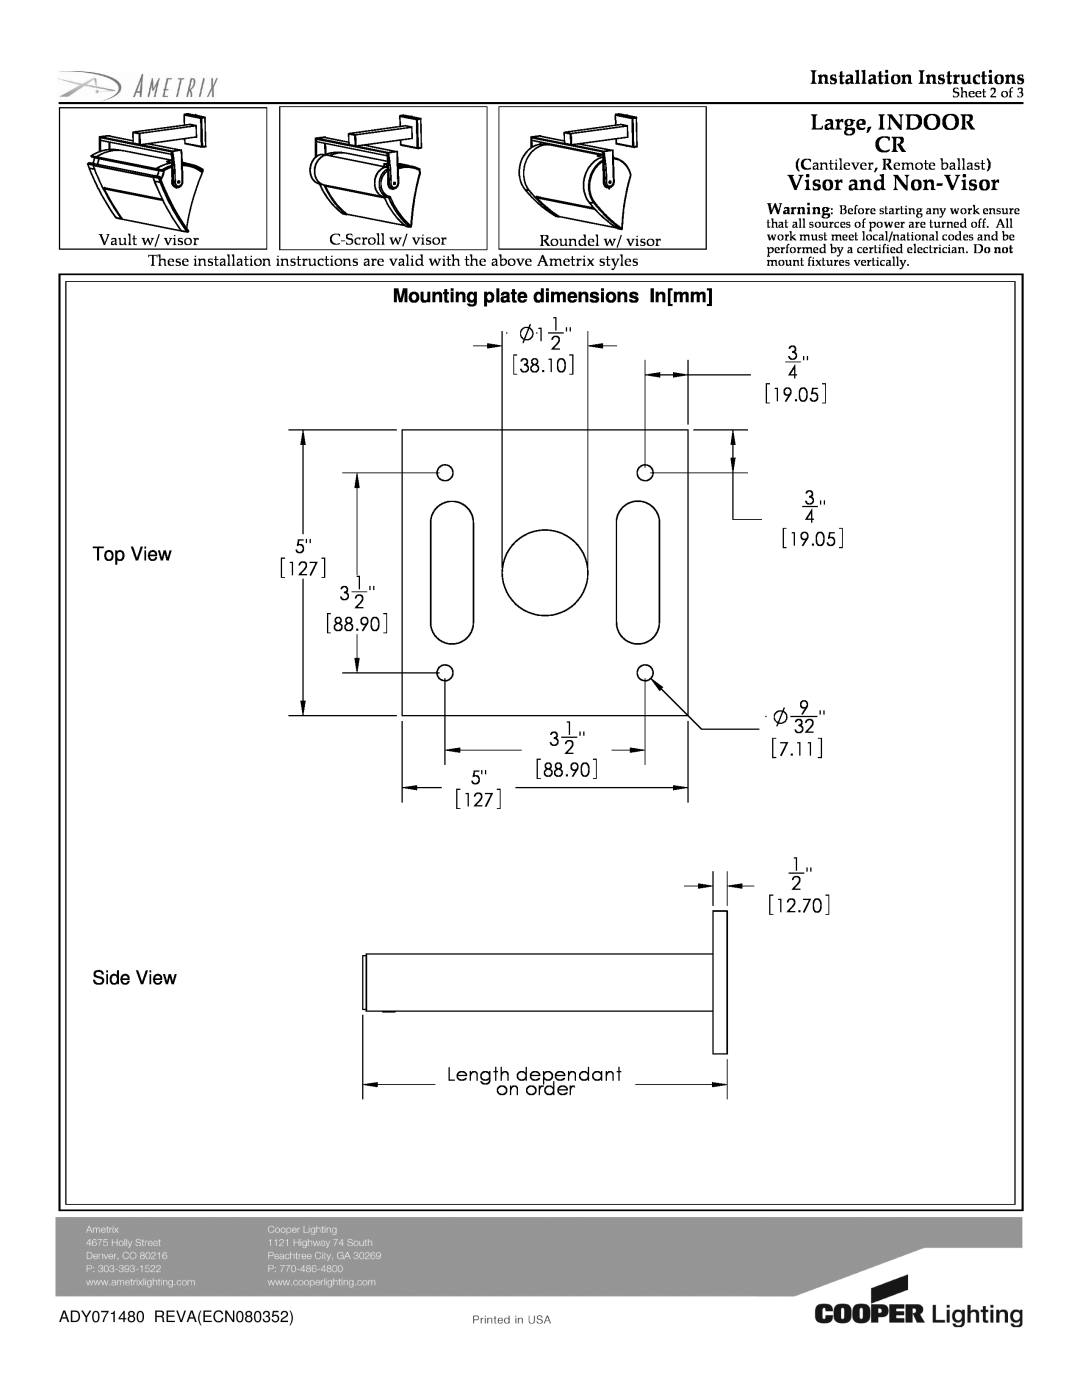 Cooper Lighting ADY071480 Large, INDOOR CR, Visor and Non-Visor, Installation Instructions, Mounting plate dimensions Inmm 